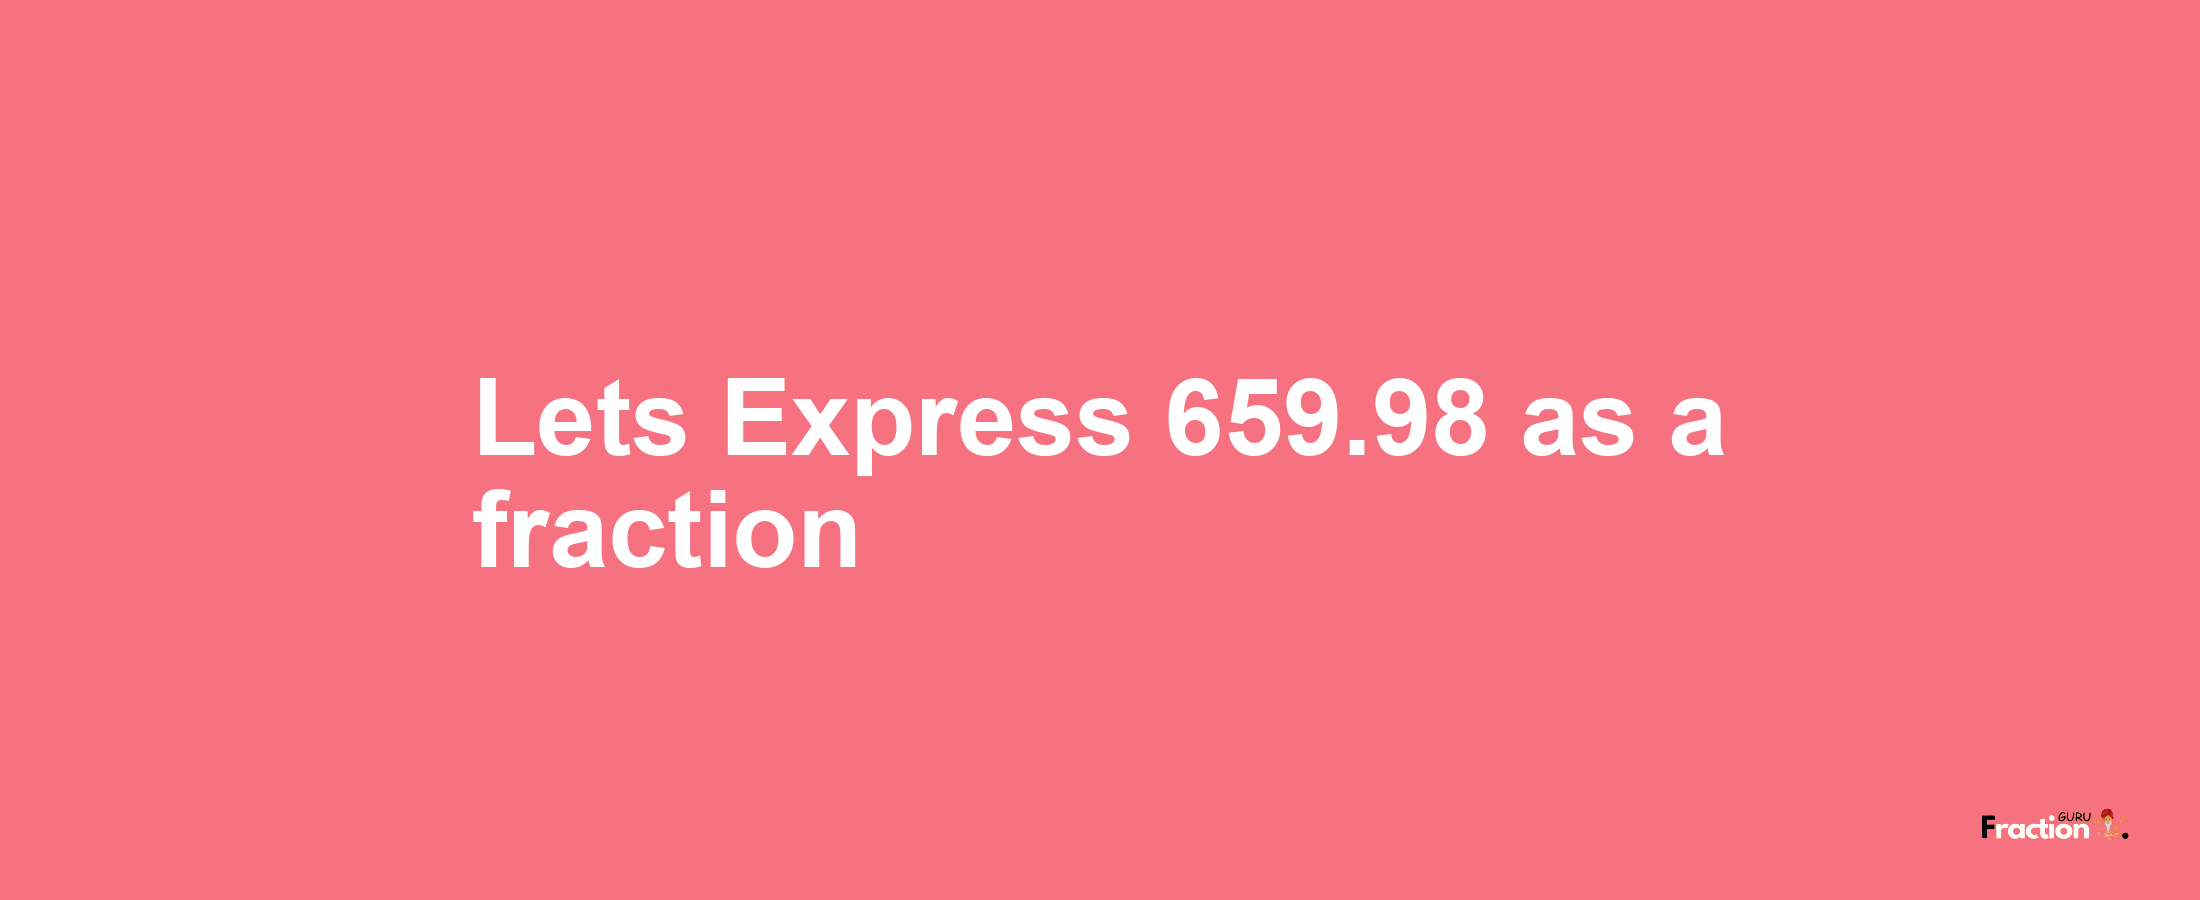 Lets Express 659.98 as afraction